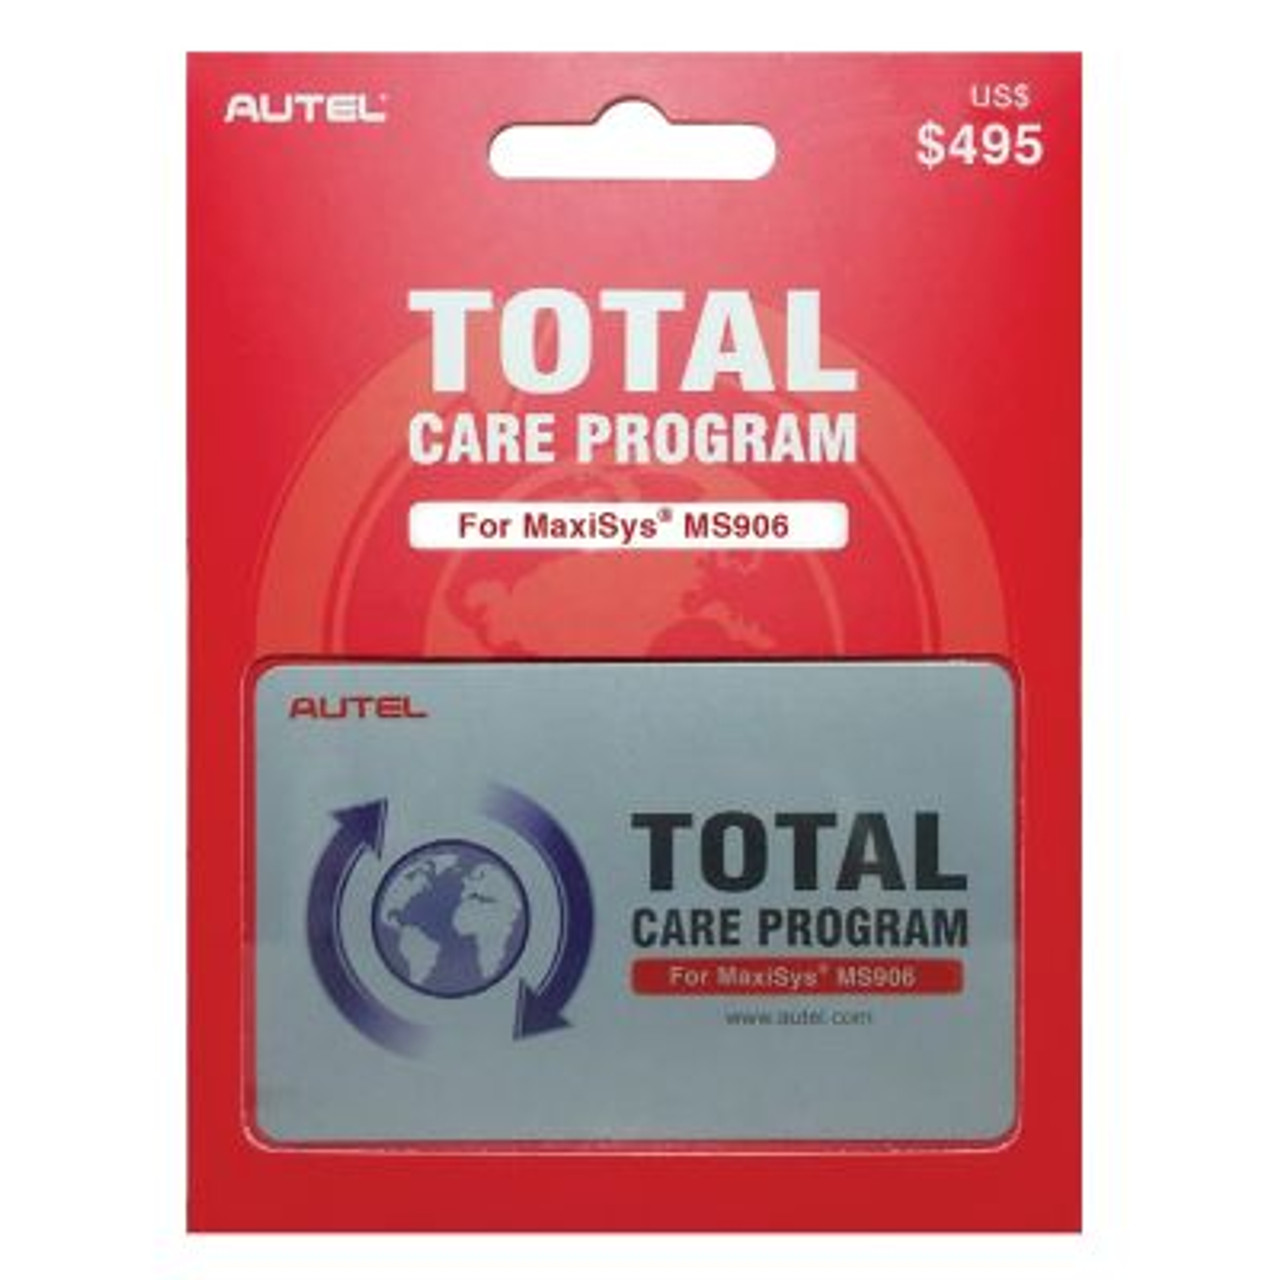 MS906 One Year Total Care Program Card